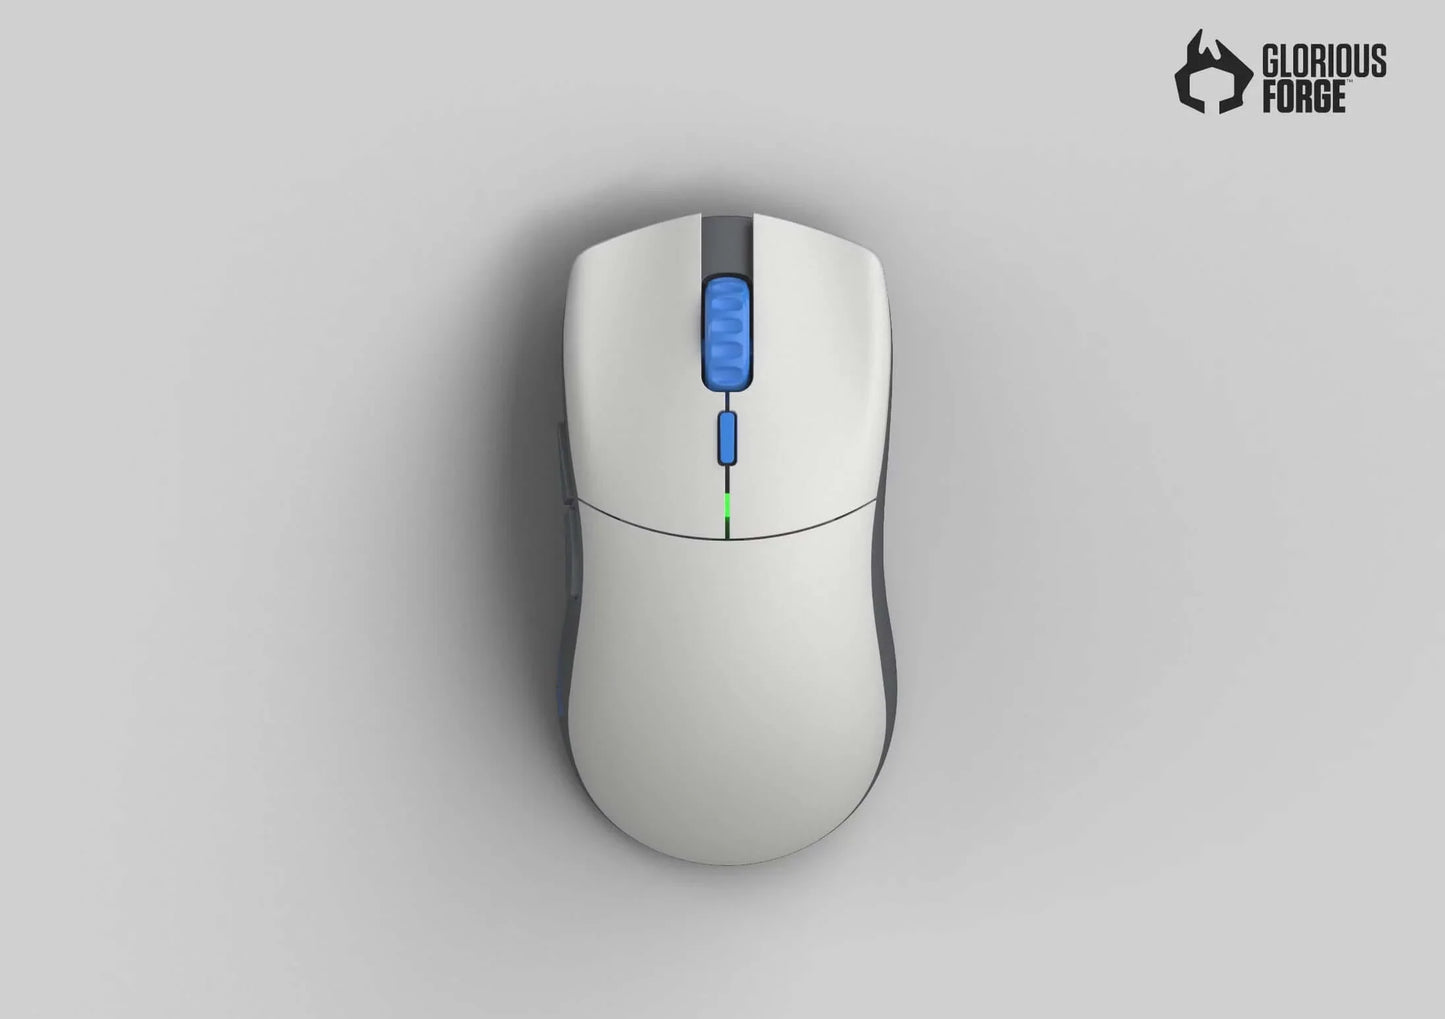 GLORIOUS FORGE SERIES ONE PRO WIRELESS GAMING MOUSE